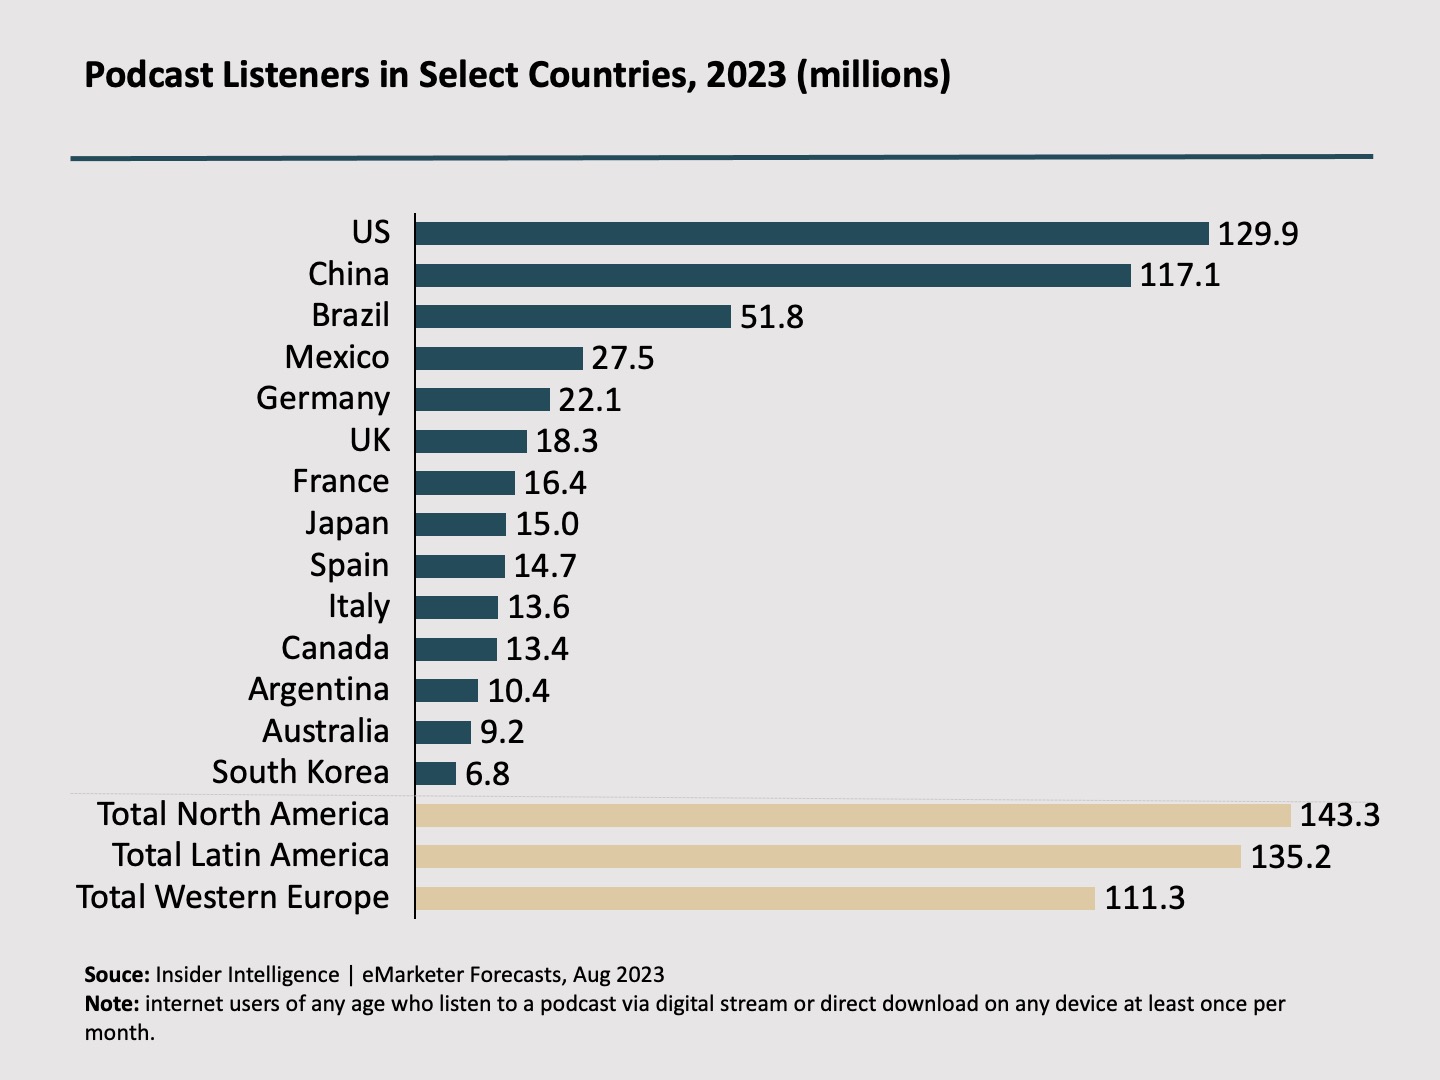 Podcast listeners in select countries